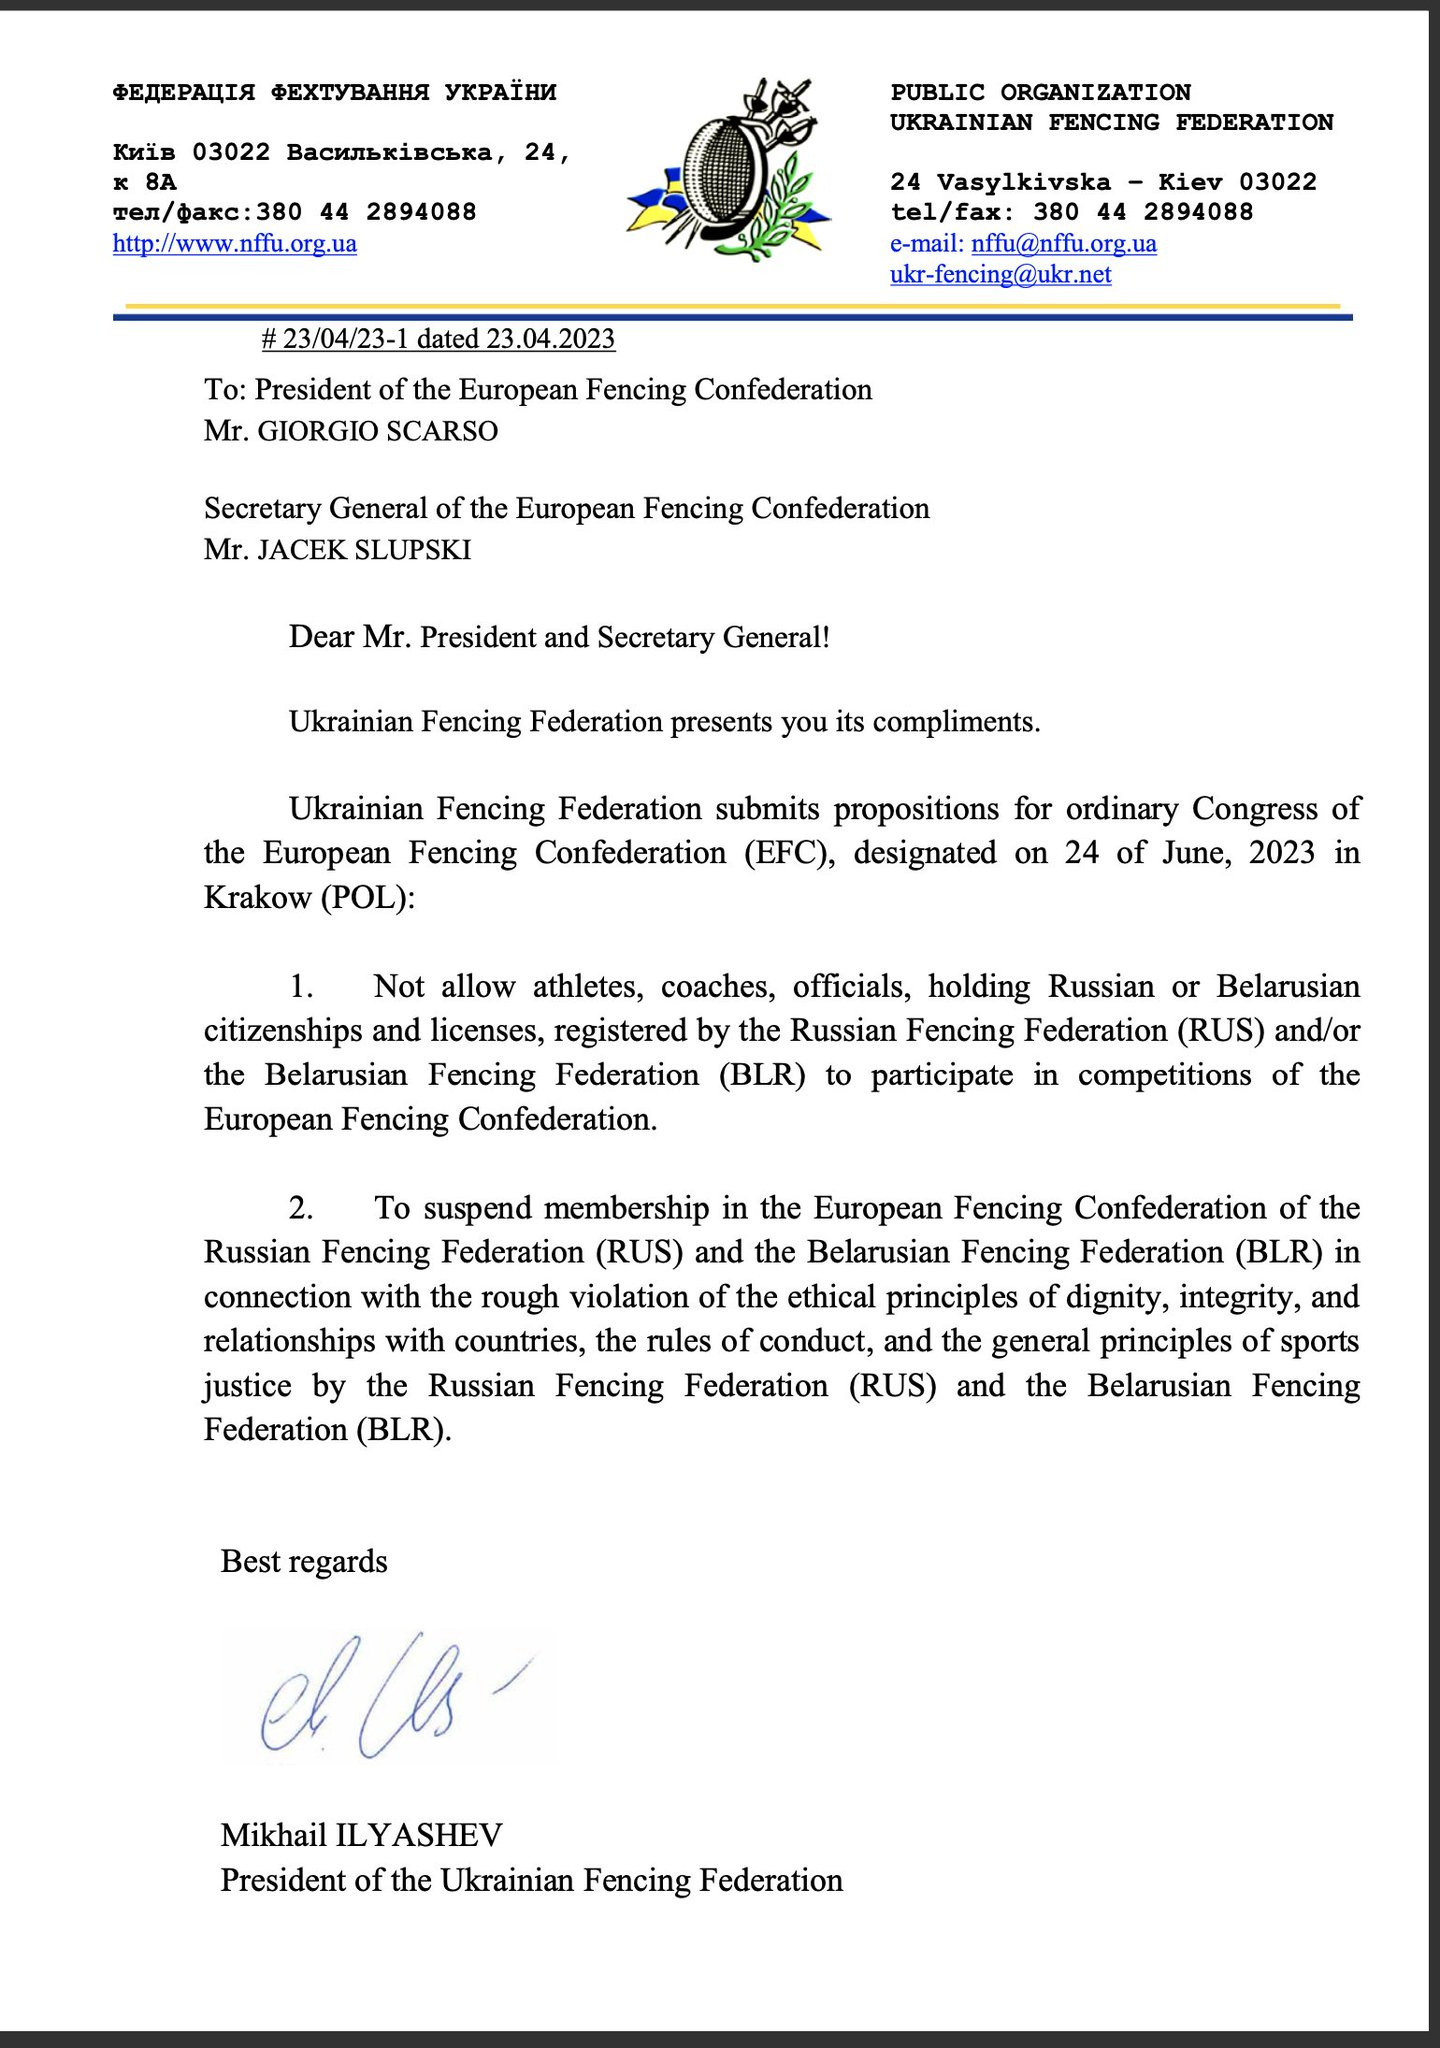 A pair of motions proposed by Mikahil Ilyashev was passed at the European Fencing Confederation Congress in Kraków ©ITG